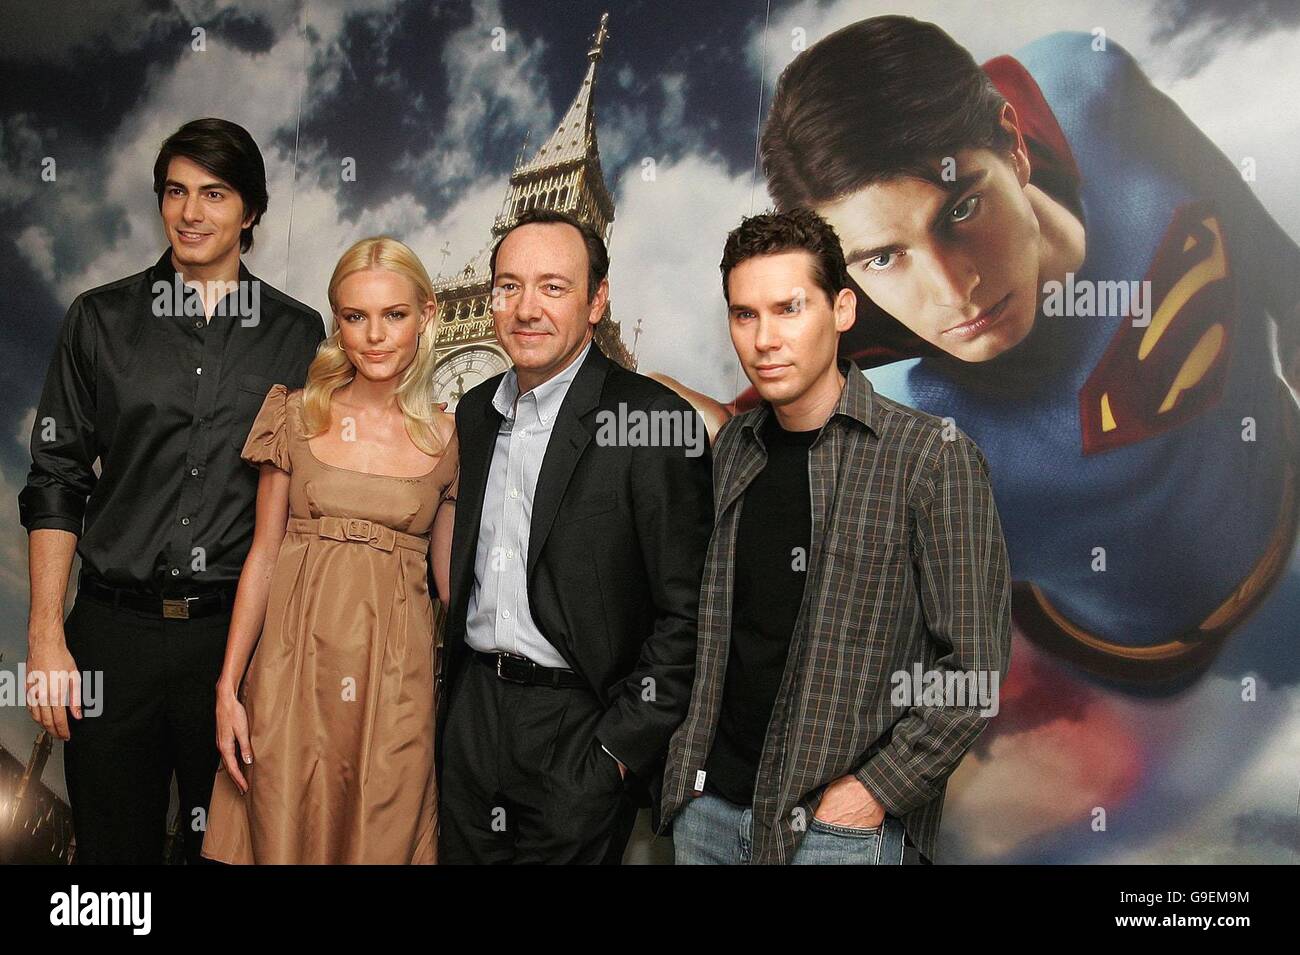 (Left to right) Brandon Routh, Kate Bosworth, Kevin Spacey and director Bryan Singer attend a photocall for their new film, Superman Returns, at the Dorchester hotel, central London. Stock Photo